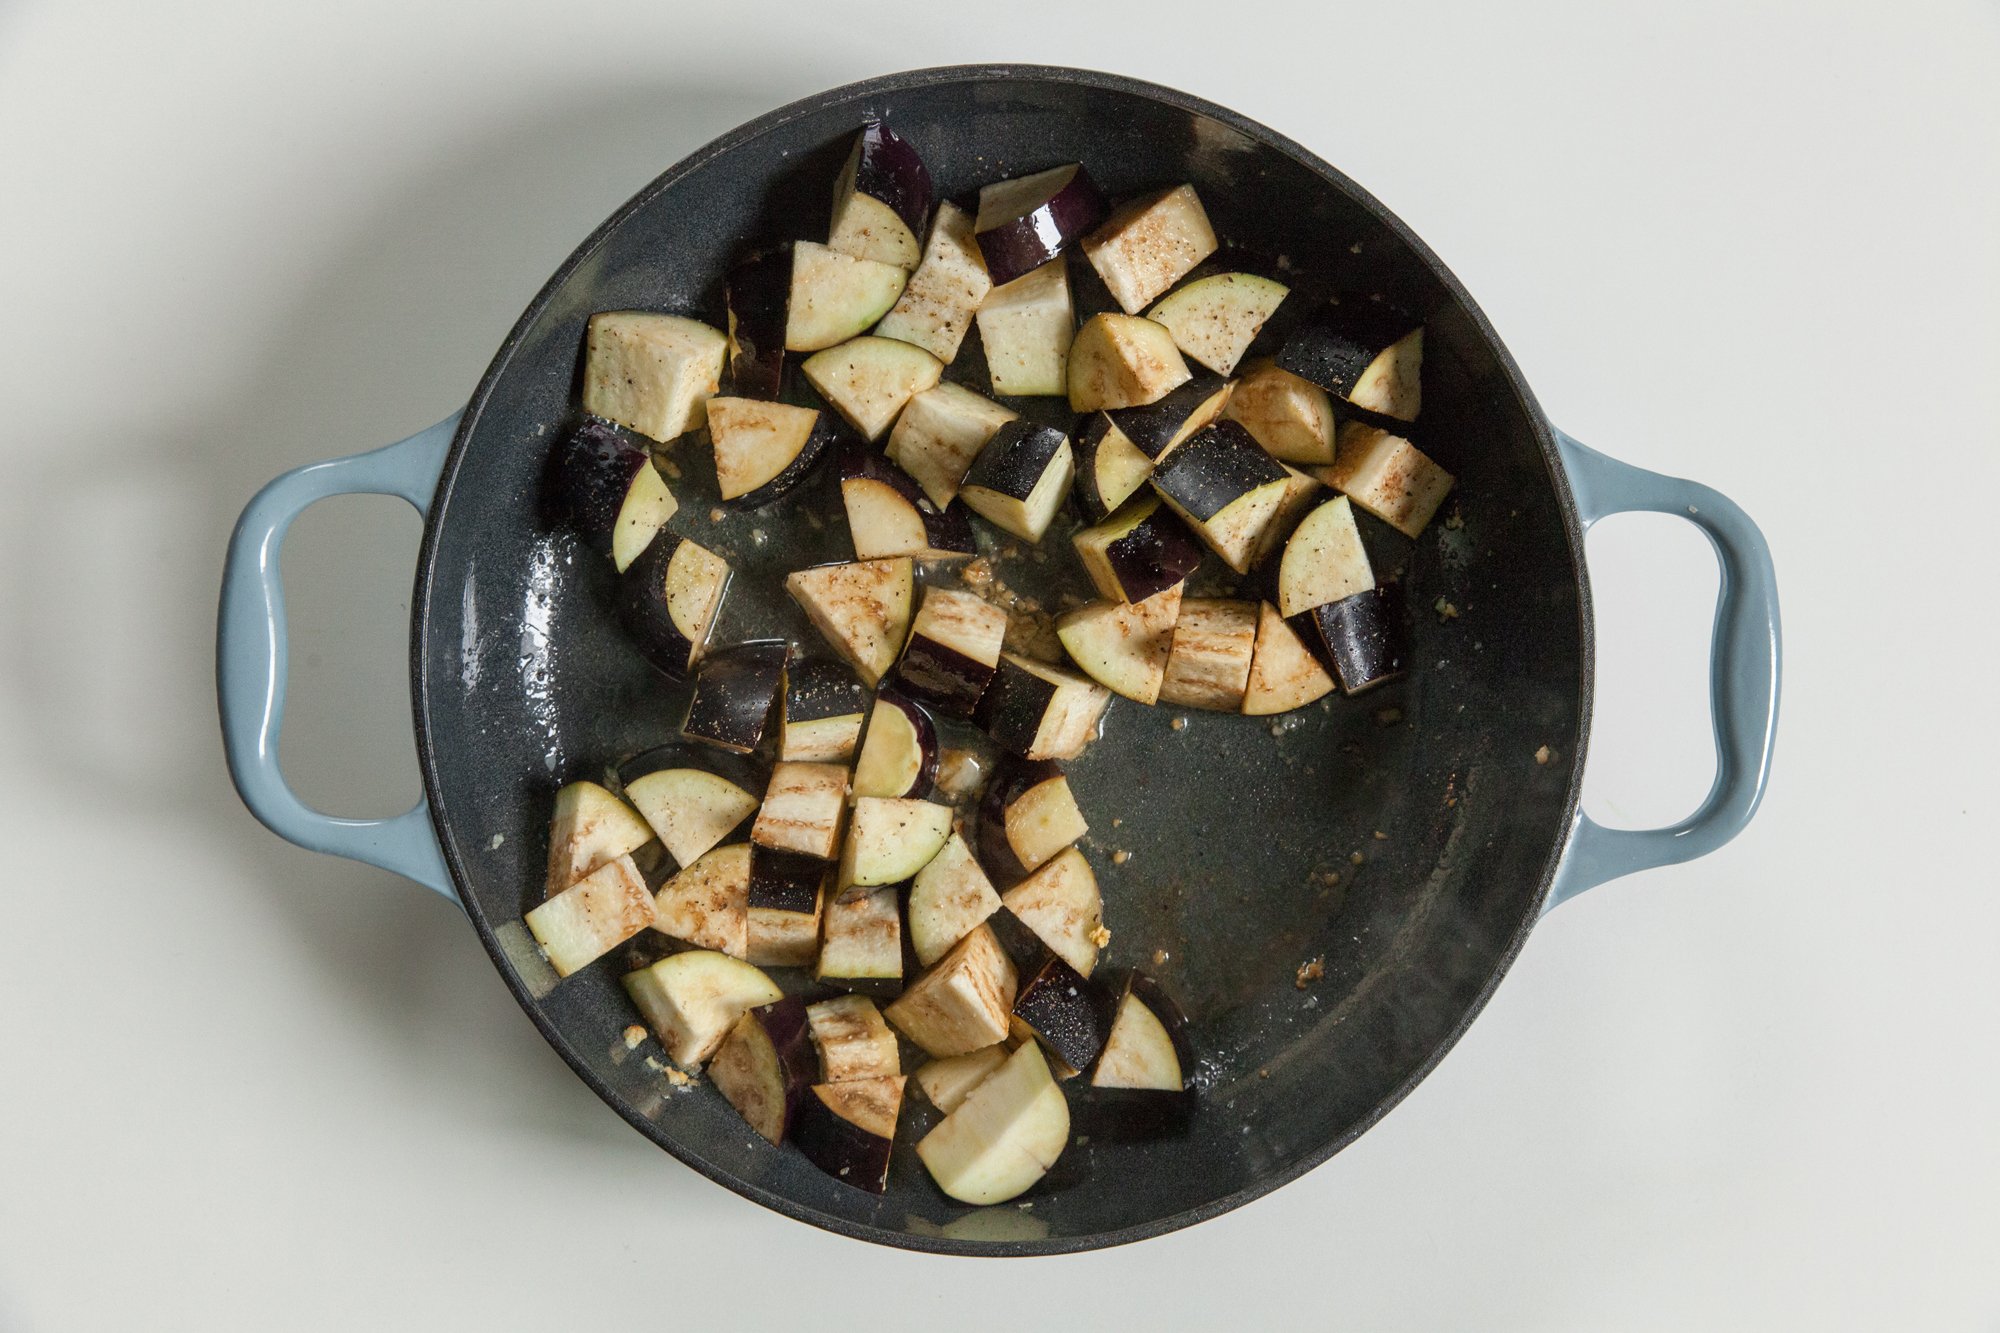  Chopped eggplant in pan on white background 